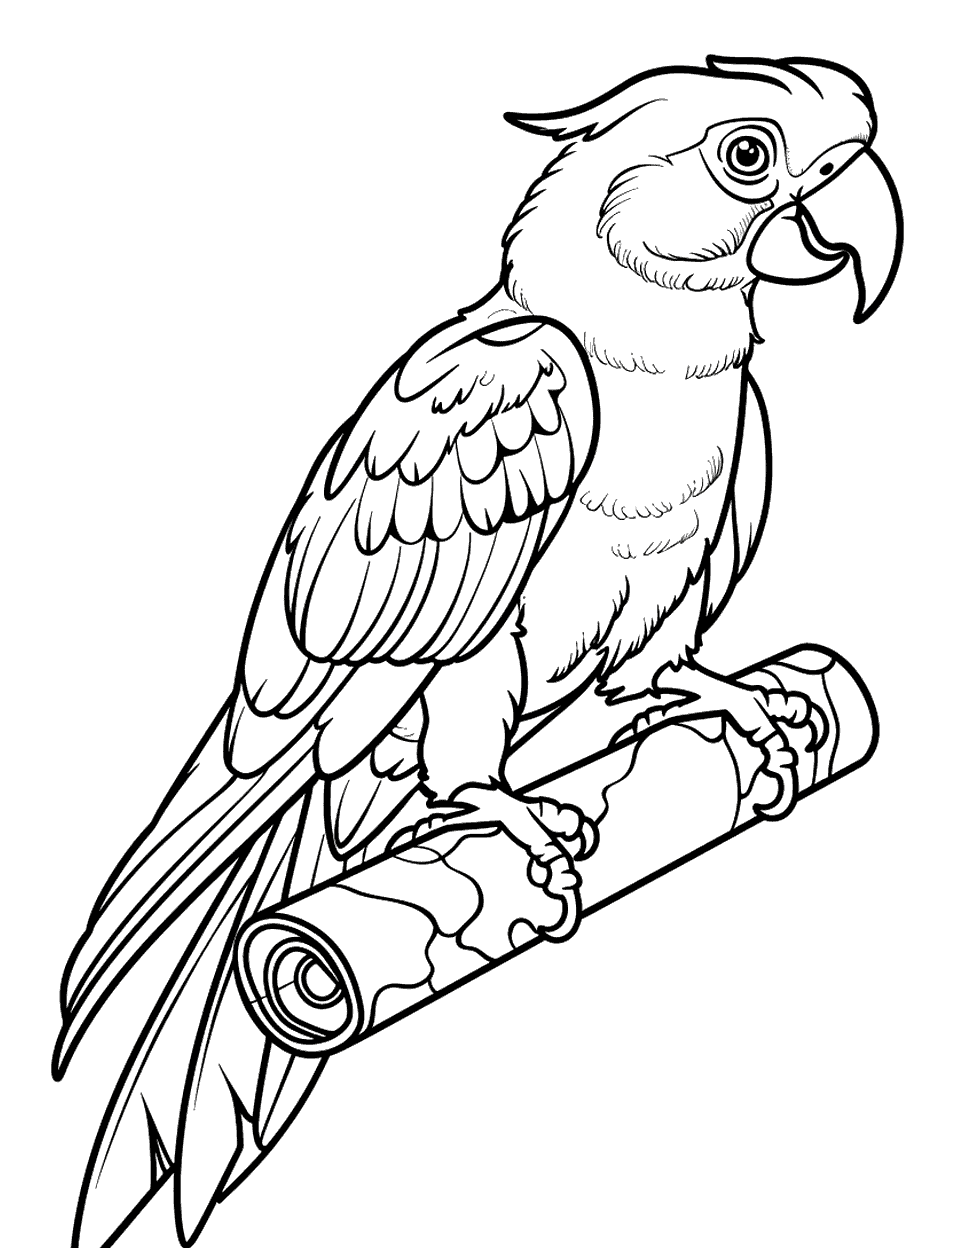 Parrot and a Simple Treasure Map Coloring Page - A parrot with a rolled-up map, hinting at an adventure.